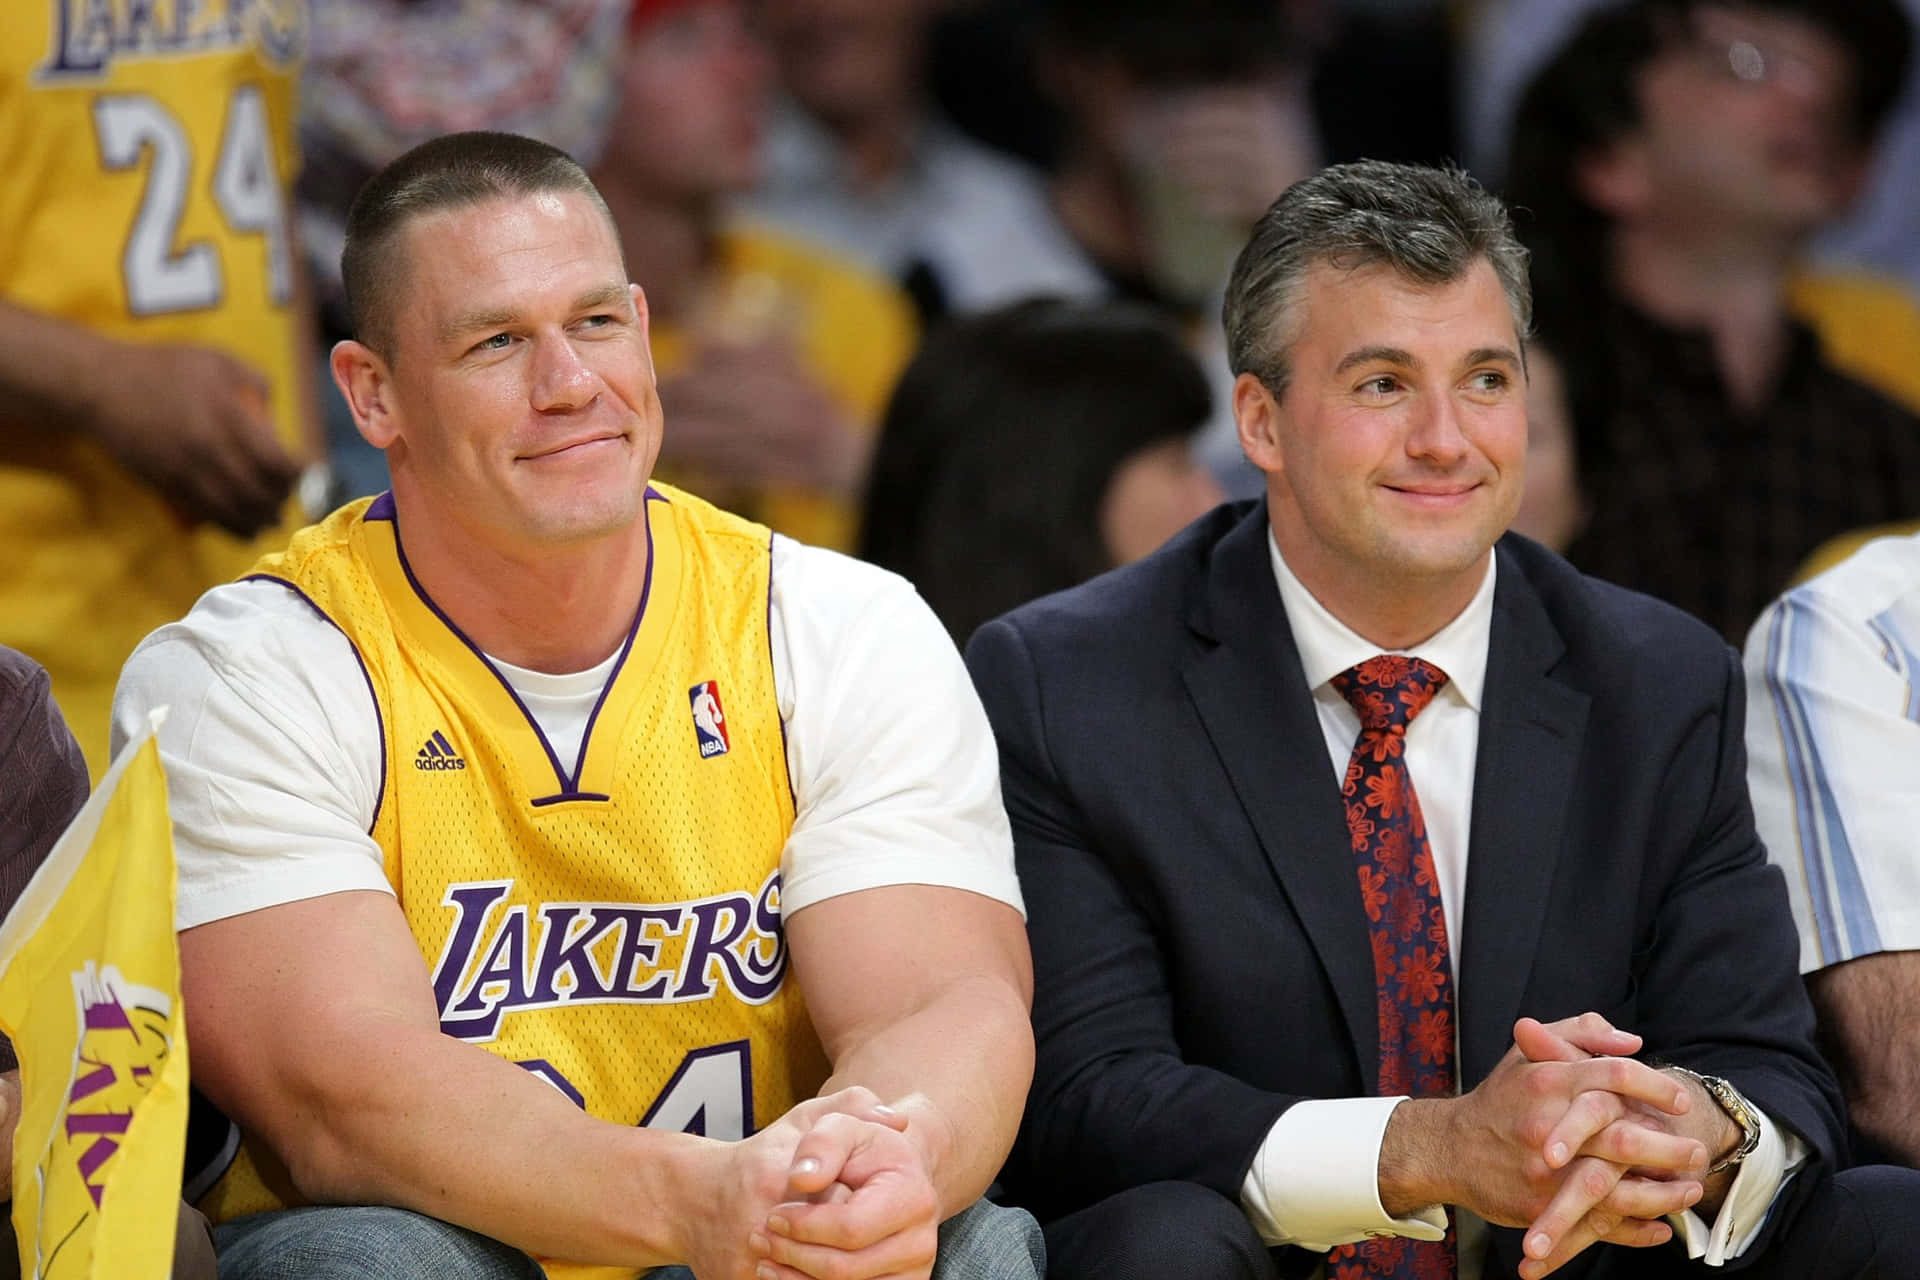 Shane Mcmahon Watching A Lakers Game With John Cena Wallpaper